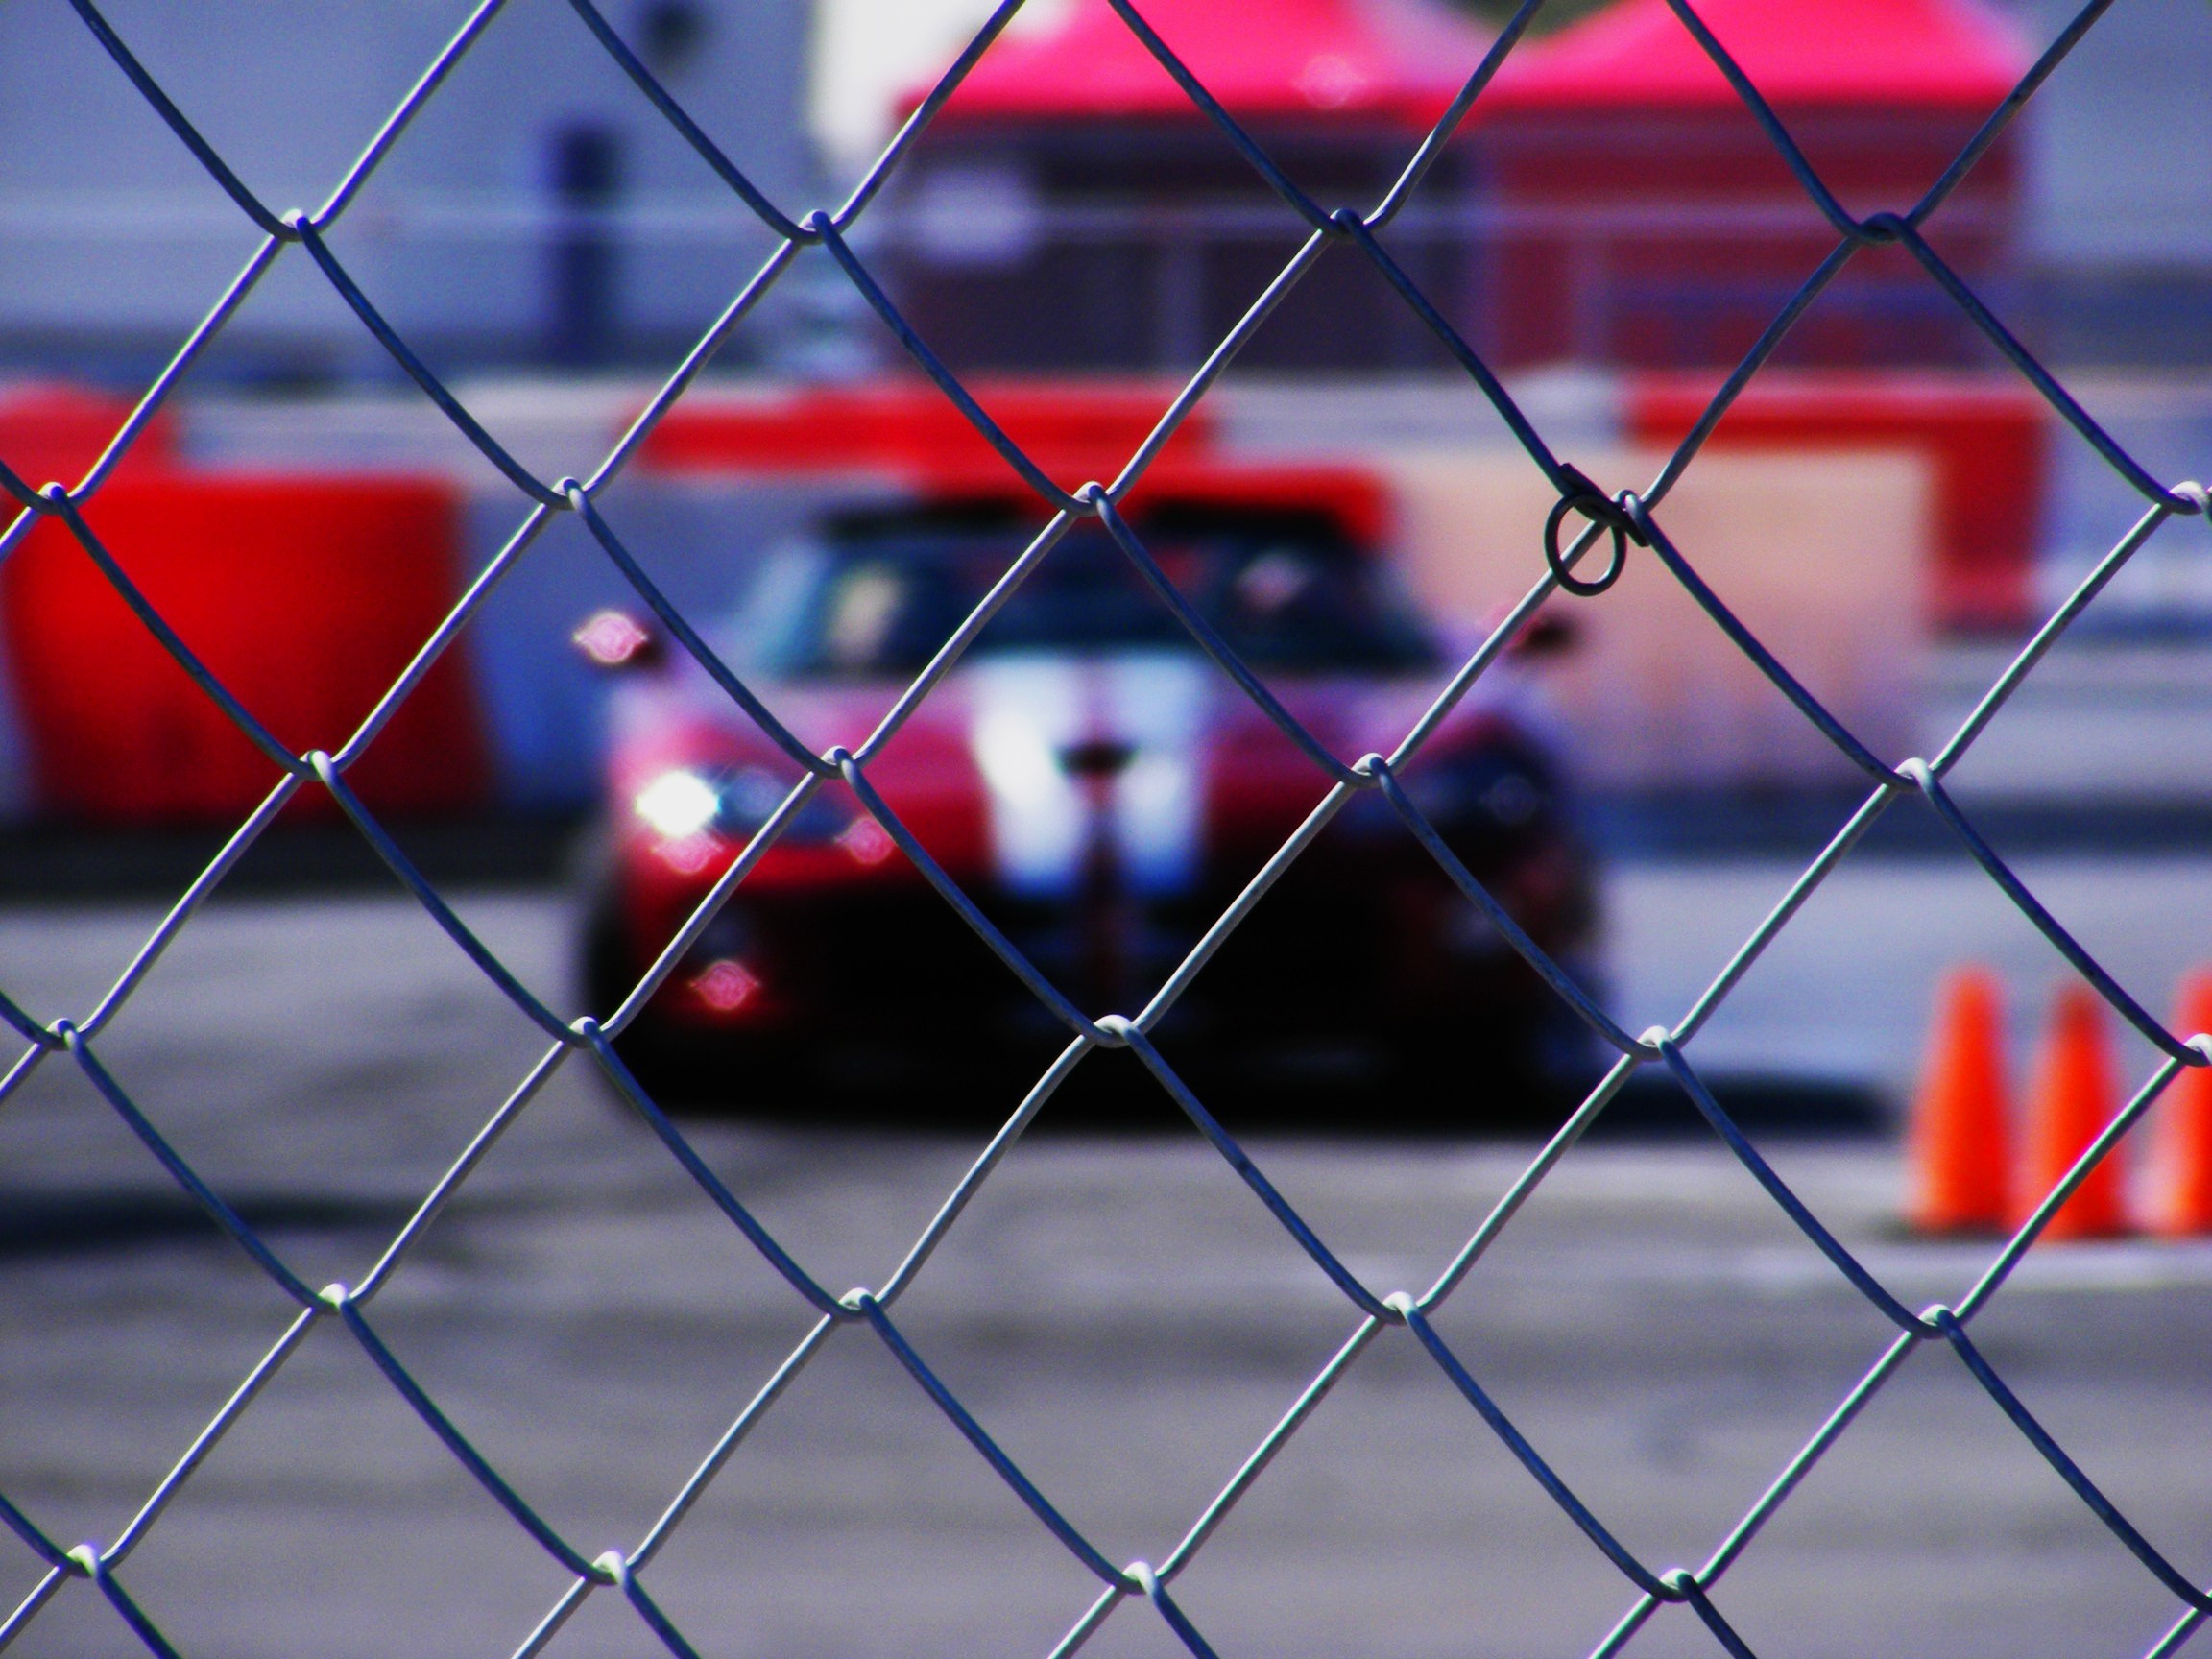 Car Chain Link Fence Depth Of Field 2304x1728